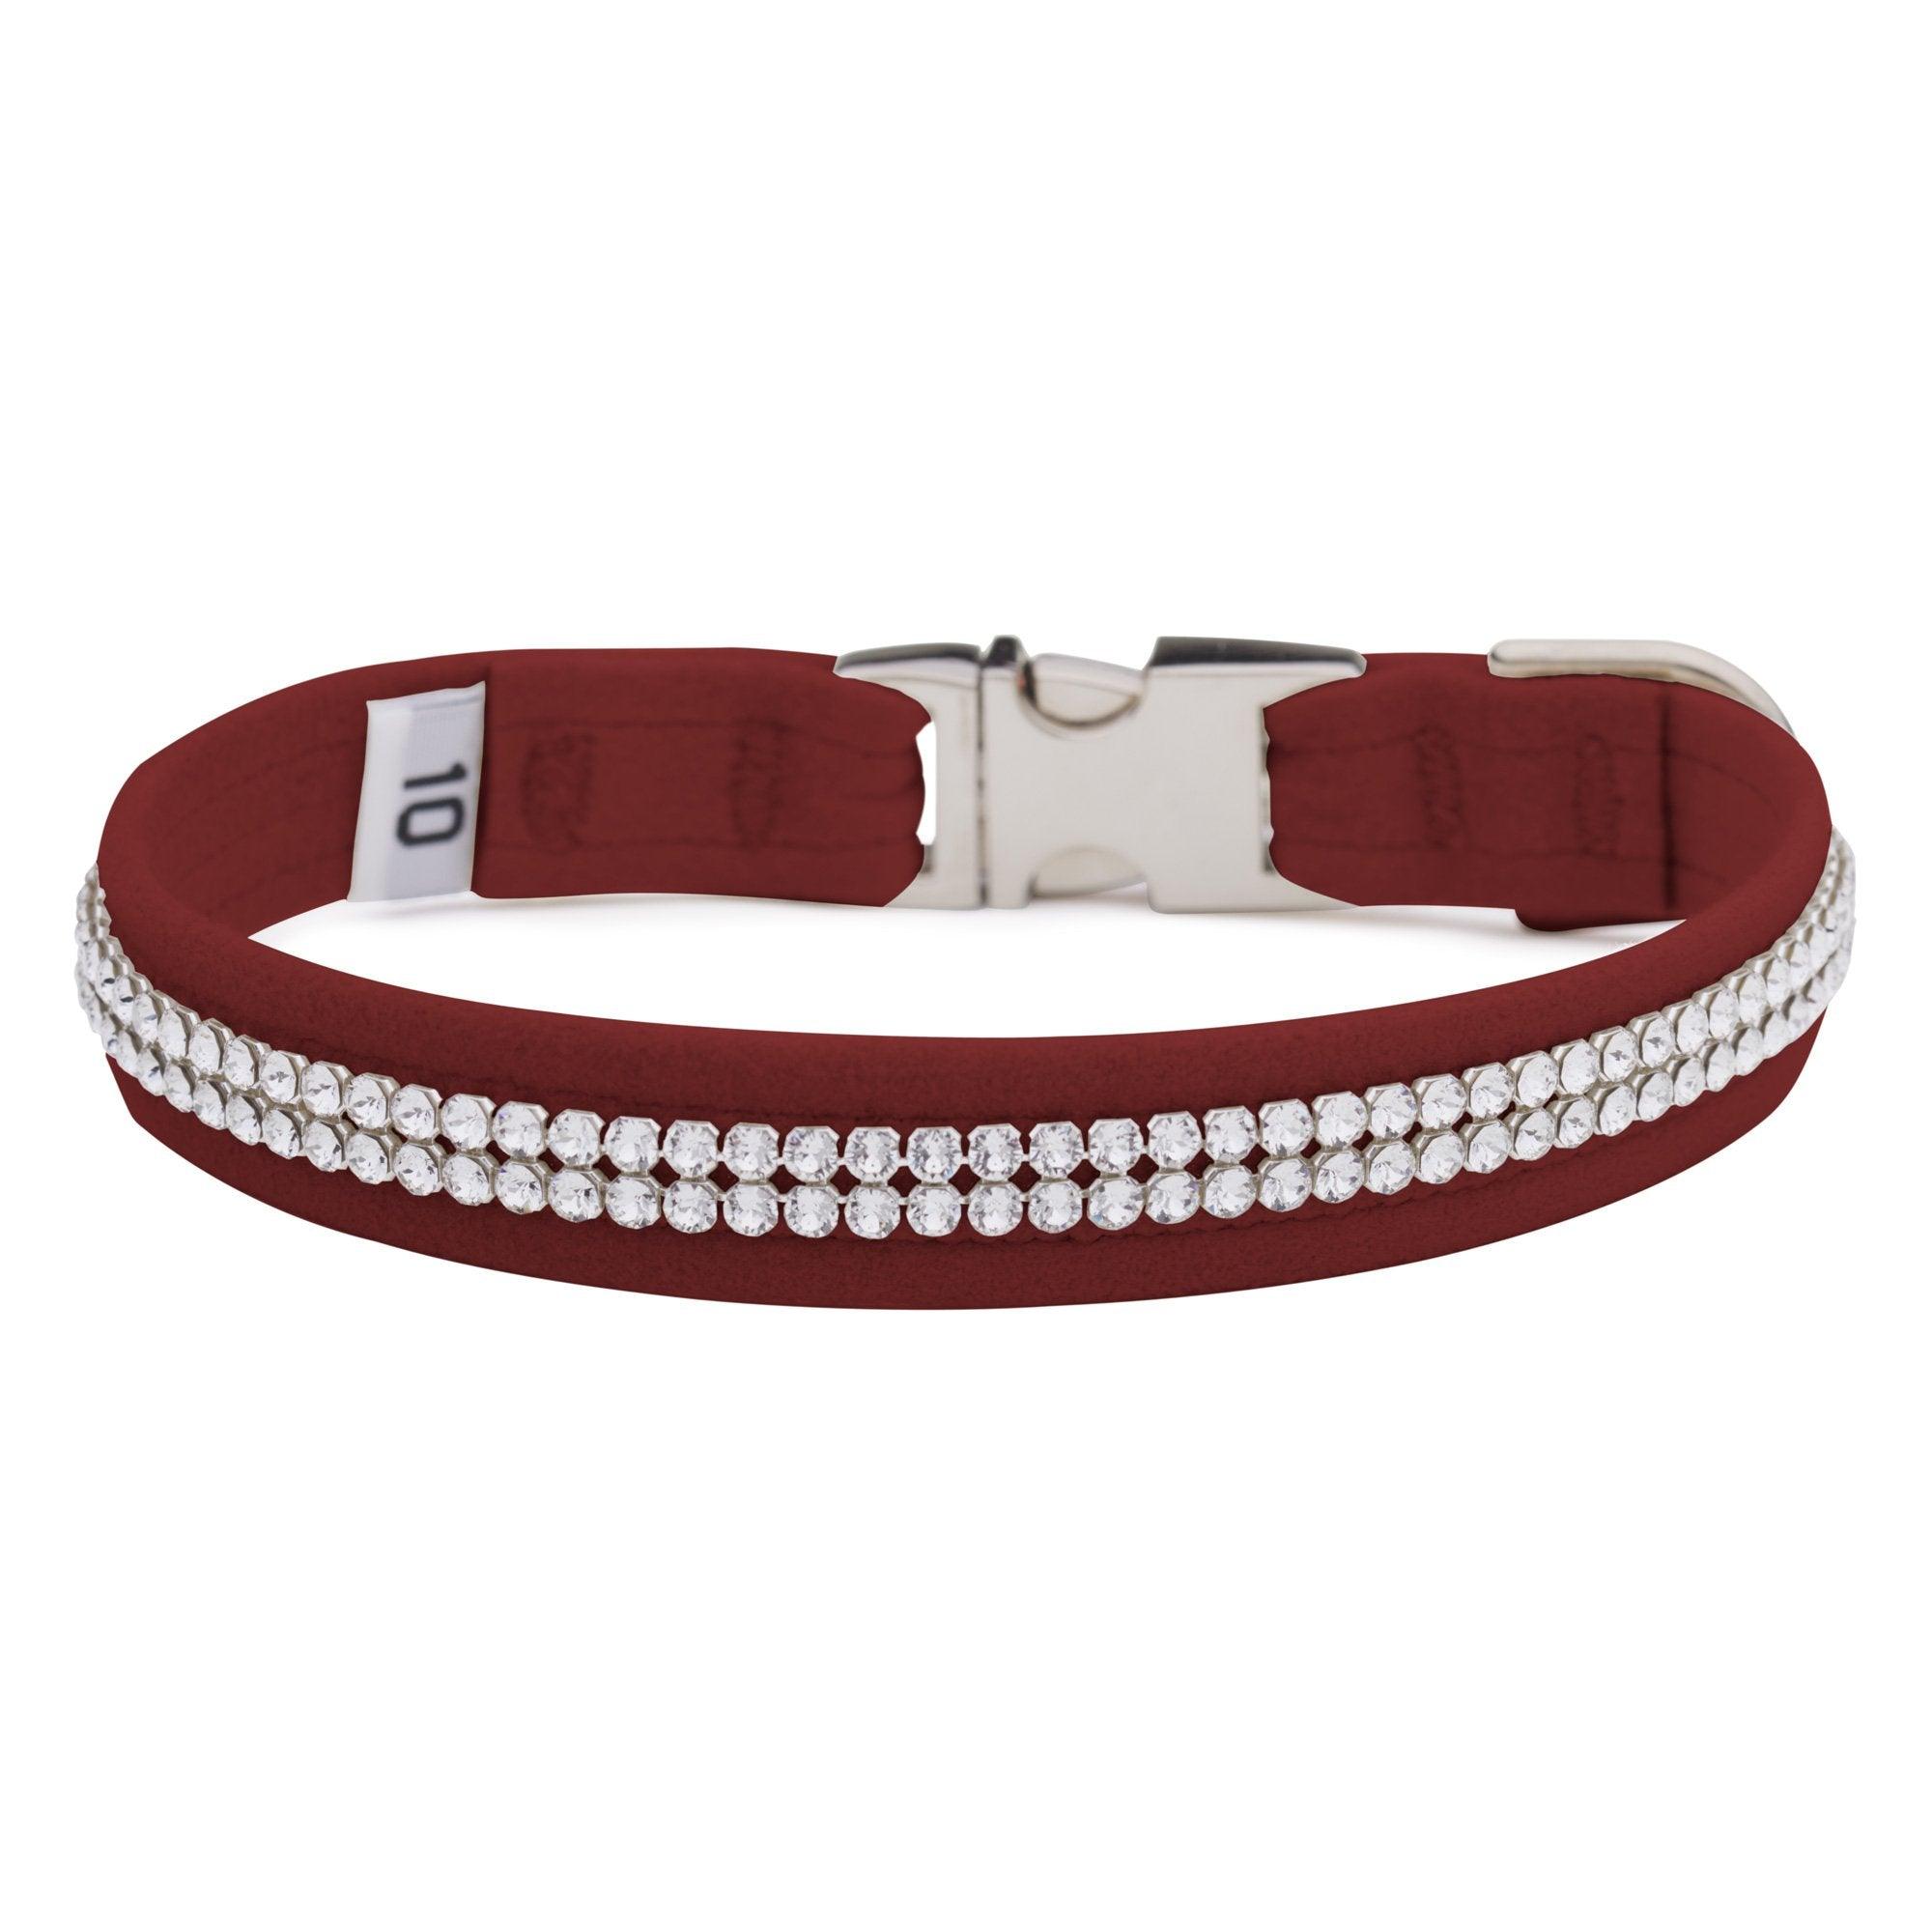 Burgundy 2 Row Giltmore Perfect Fit Collar - Rocky & Maggie's Pet Boutique and Salon